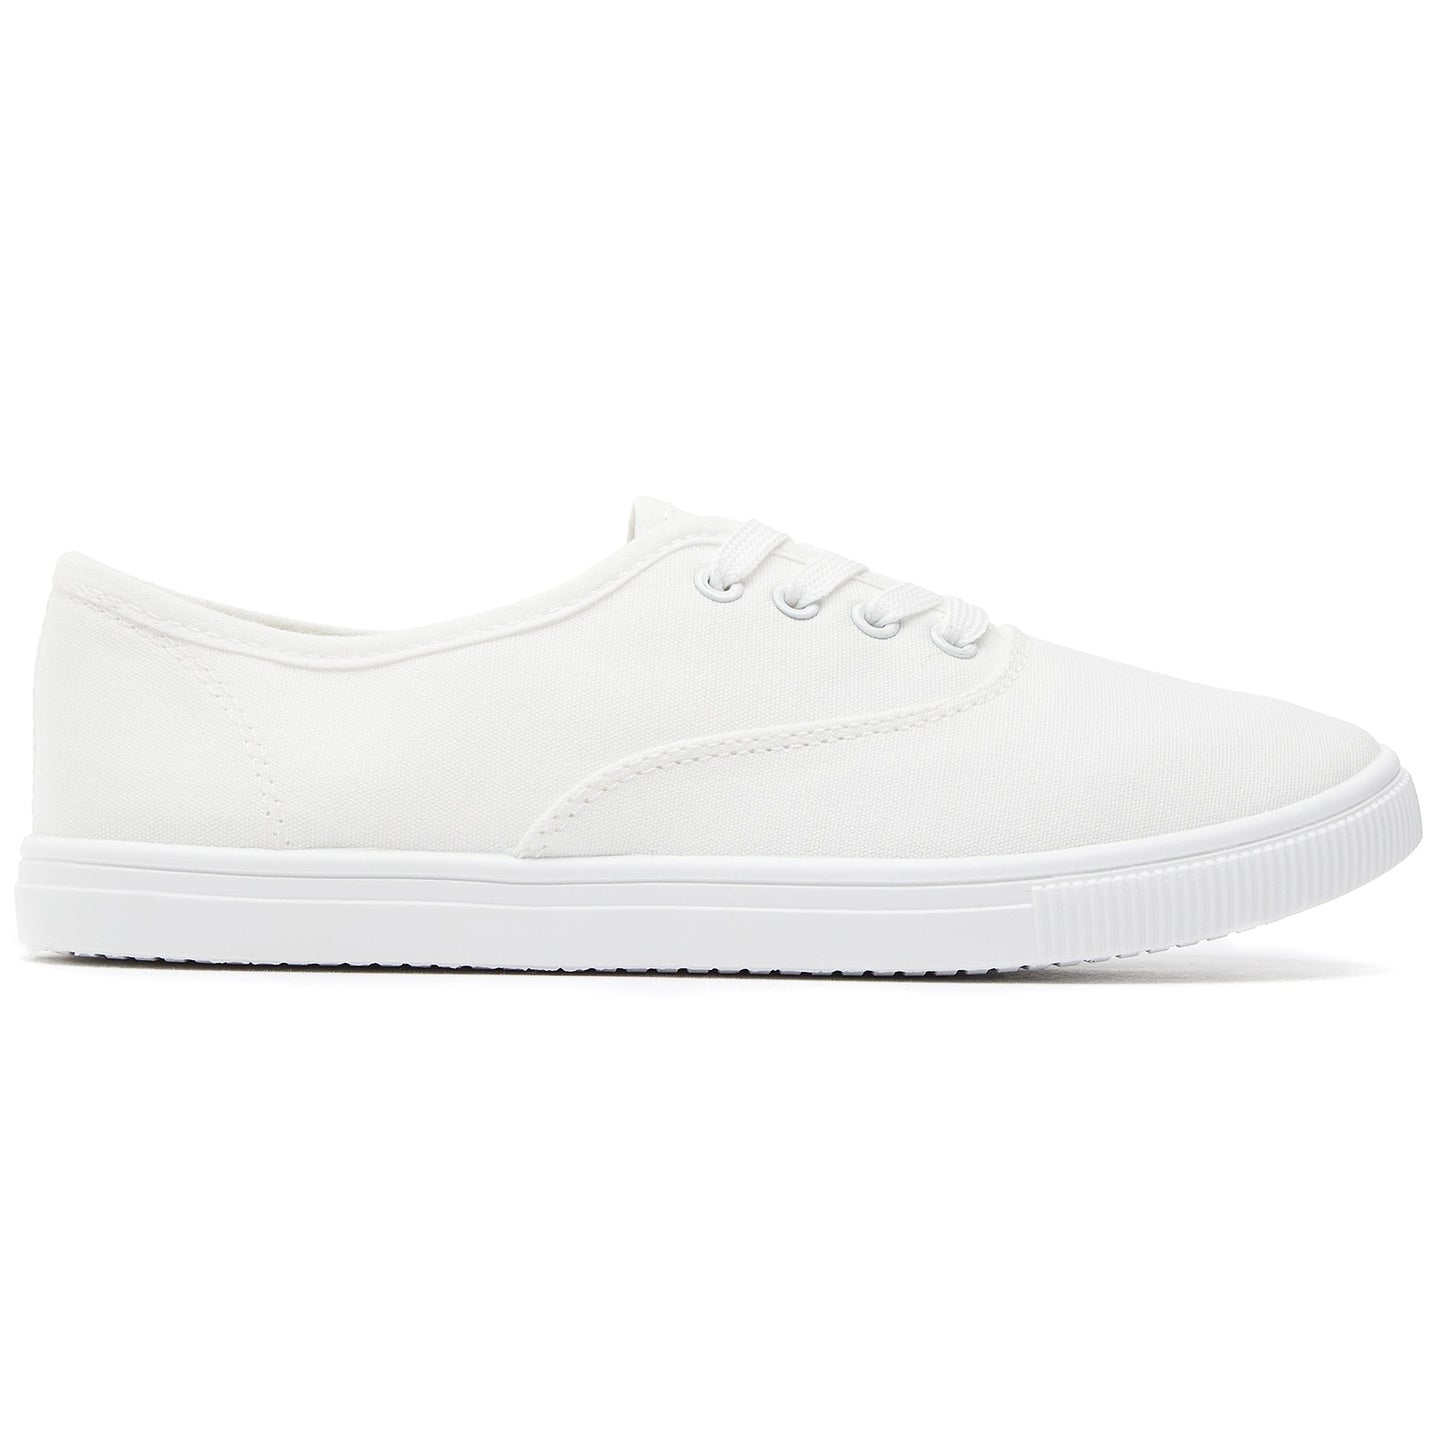 SOBEYO Women's Sneakers Canvas Lace Up Low Top White